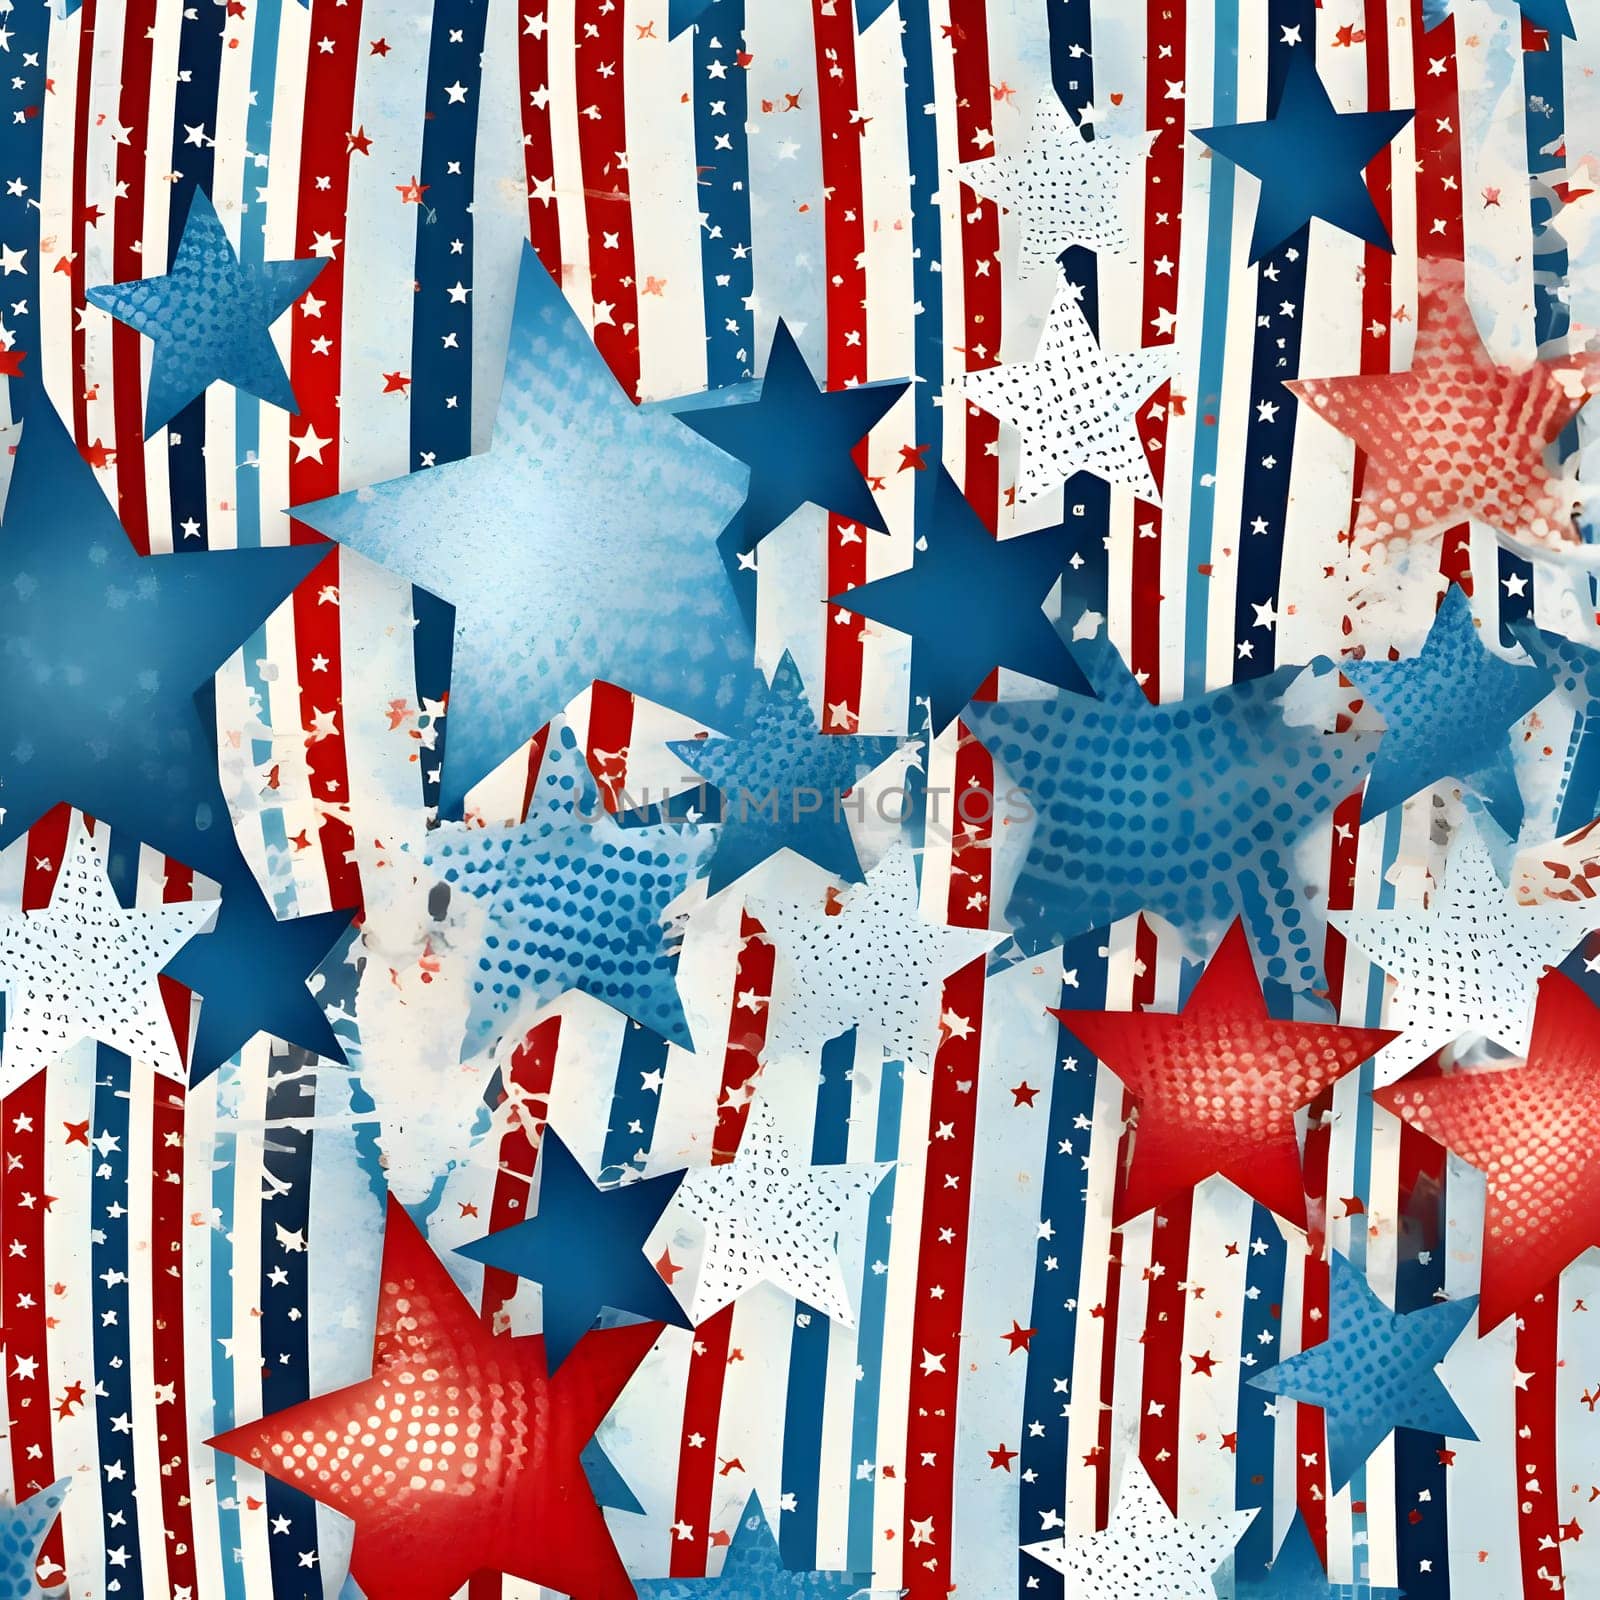 Patterns and banners backgrounds: Seamless background pattern. Stars and stripes pattern. Vector illustration.